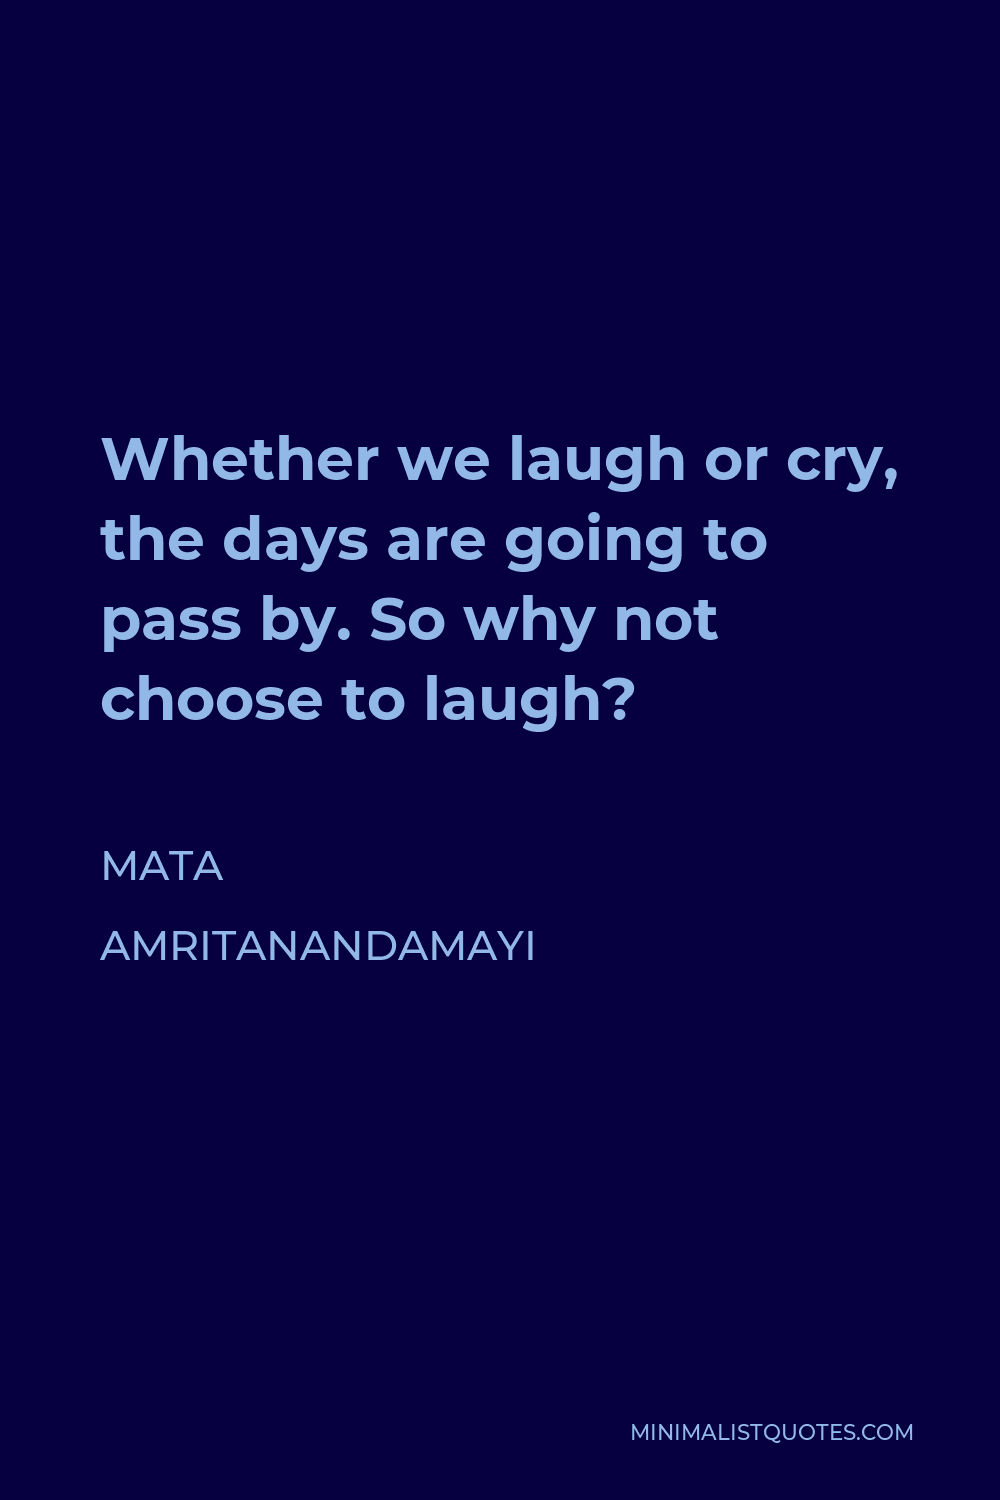 Mata Amritanandamayi Quote - Whether we laugh or cry, the days are going to pass by. So why not choose to laugh?